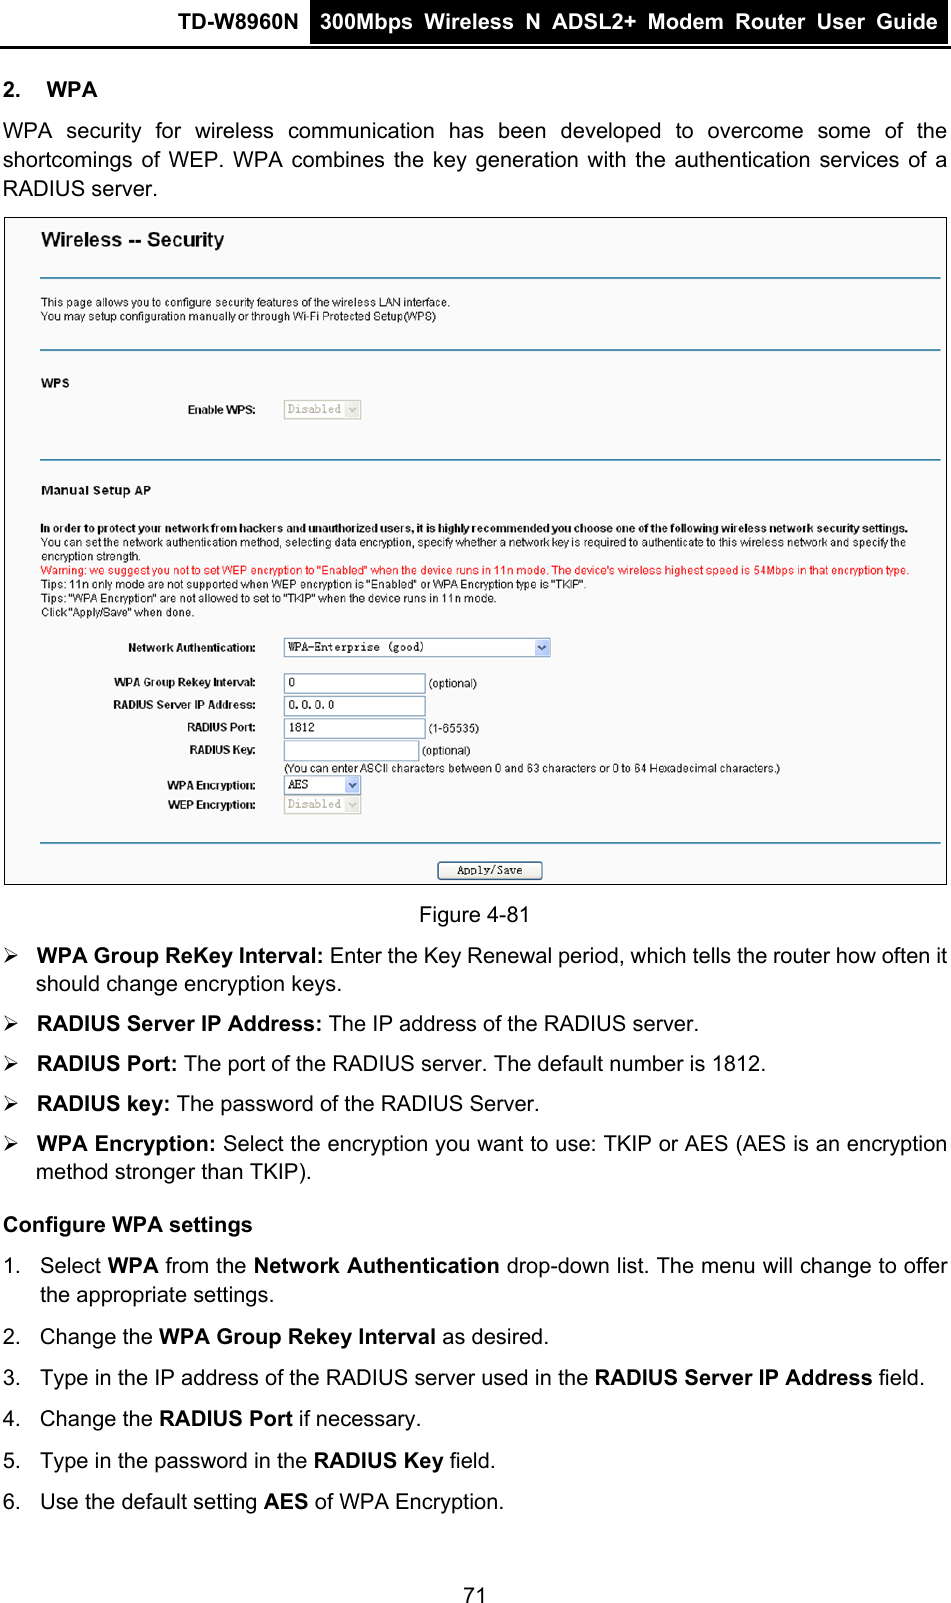 TD-W8960N  300Mbps Wireless N ADSL2+ Modem Router User Guide  2. WPA WPA security for wireless communication has been developed to overcome some of the shortcomings of WEP. WPA combines the key generation with the authentication services of a RADIUS server.  Figure 4-81  WPA Group ReKey Interval: Enter the Key Renewal period, which tells the router how often it should change encryption keys.  RADIUS Server IP Address: The IP address of the RADIUS server.  RADIUS Port: The port of the RADIUS server. The default number is 1812.  RADIUS key: The password of the RADIUS Server.  WPA Encryption: Select the encryption you want to use: TKIP or AES (AES is an encryption method stronger than TKIP). Configure WPA settings 1. Select WPA from the Network Authentication drop-down list. The menu will change to offer the appropriate settings. 2. Change the WPA Group Rekey Interval as desired. 3.  Type in the IP address of the RADIUS server used in the RADIUS Server IP Address field. 4. Change the RADIUS Port if necessary. 5.  Type in the password in the RADIUS Key field. 6.  Use the default setting AES of WPA Encryption. 71 